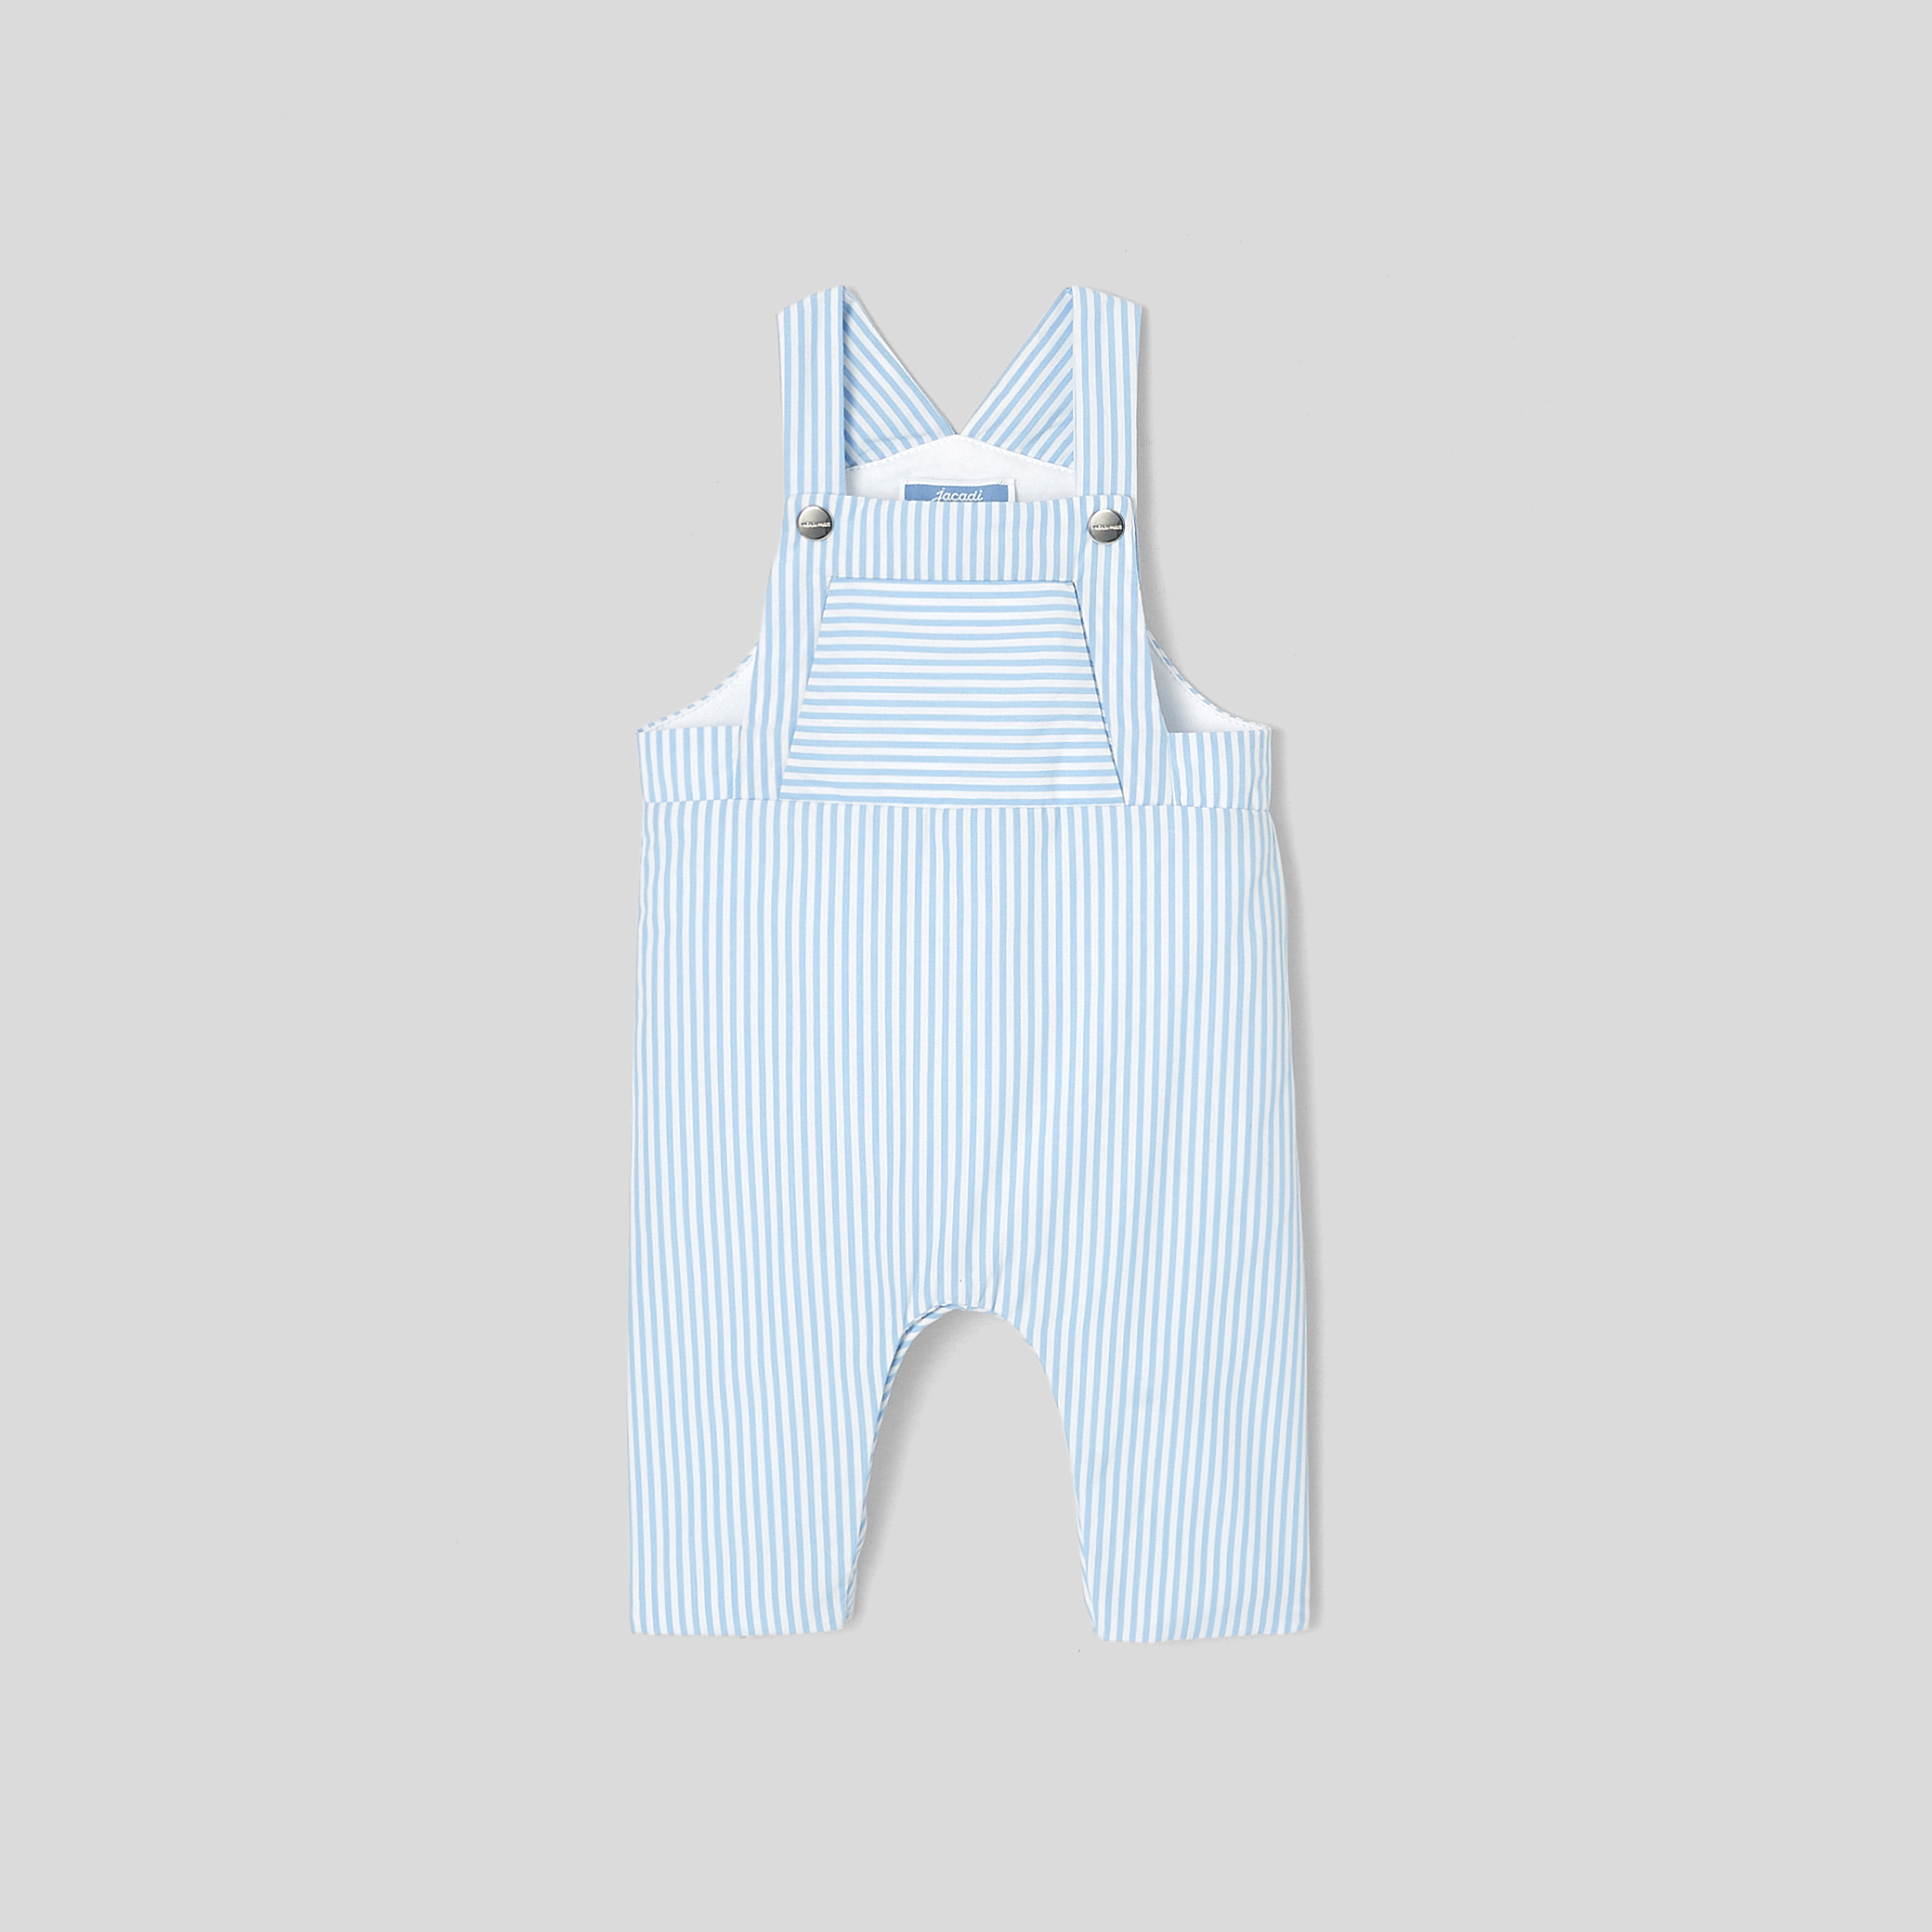 Baby boy striped overalls